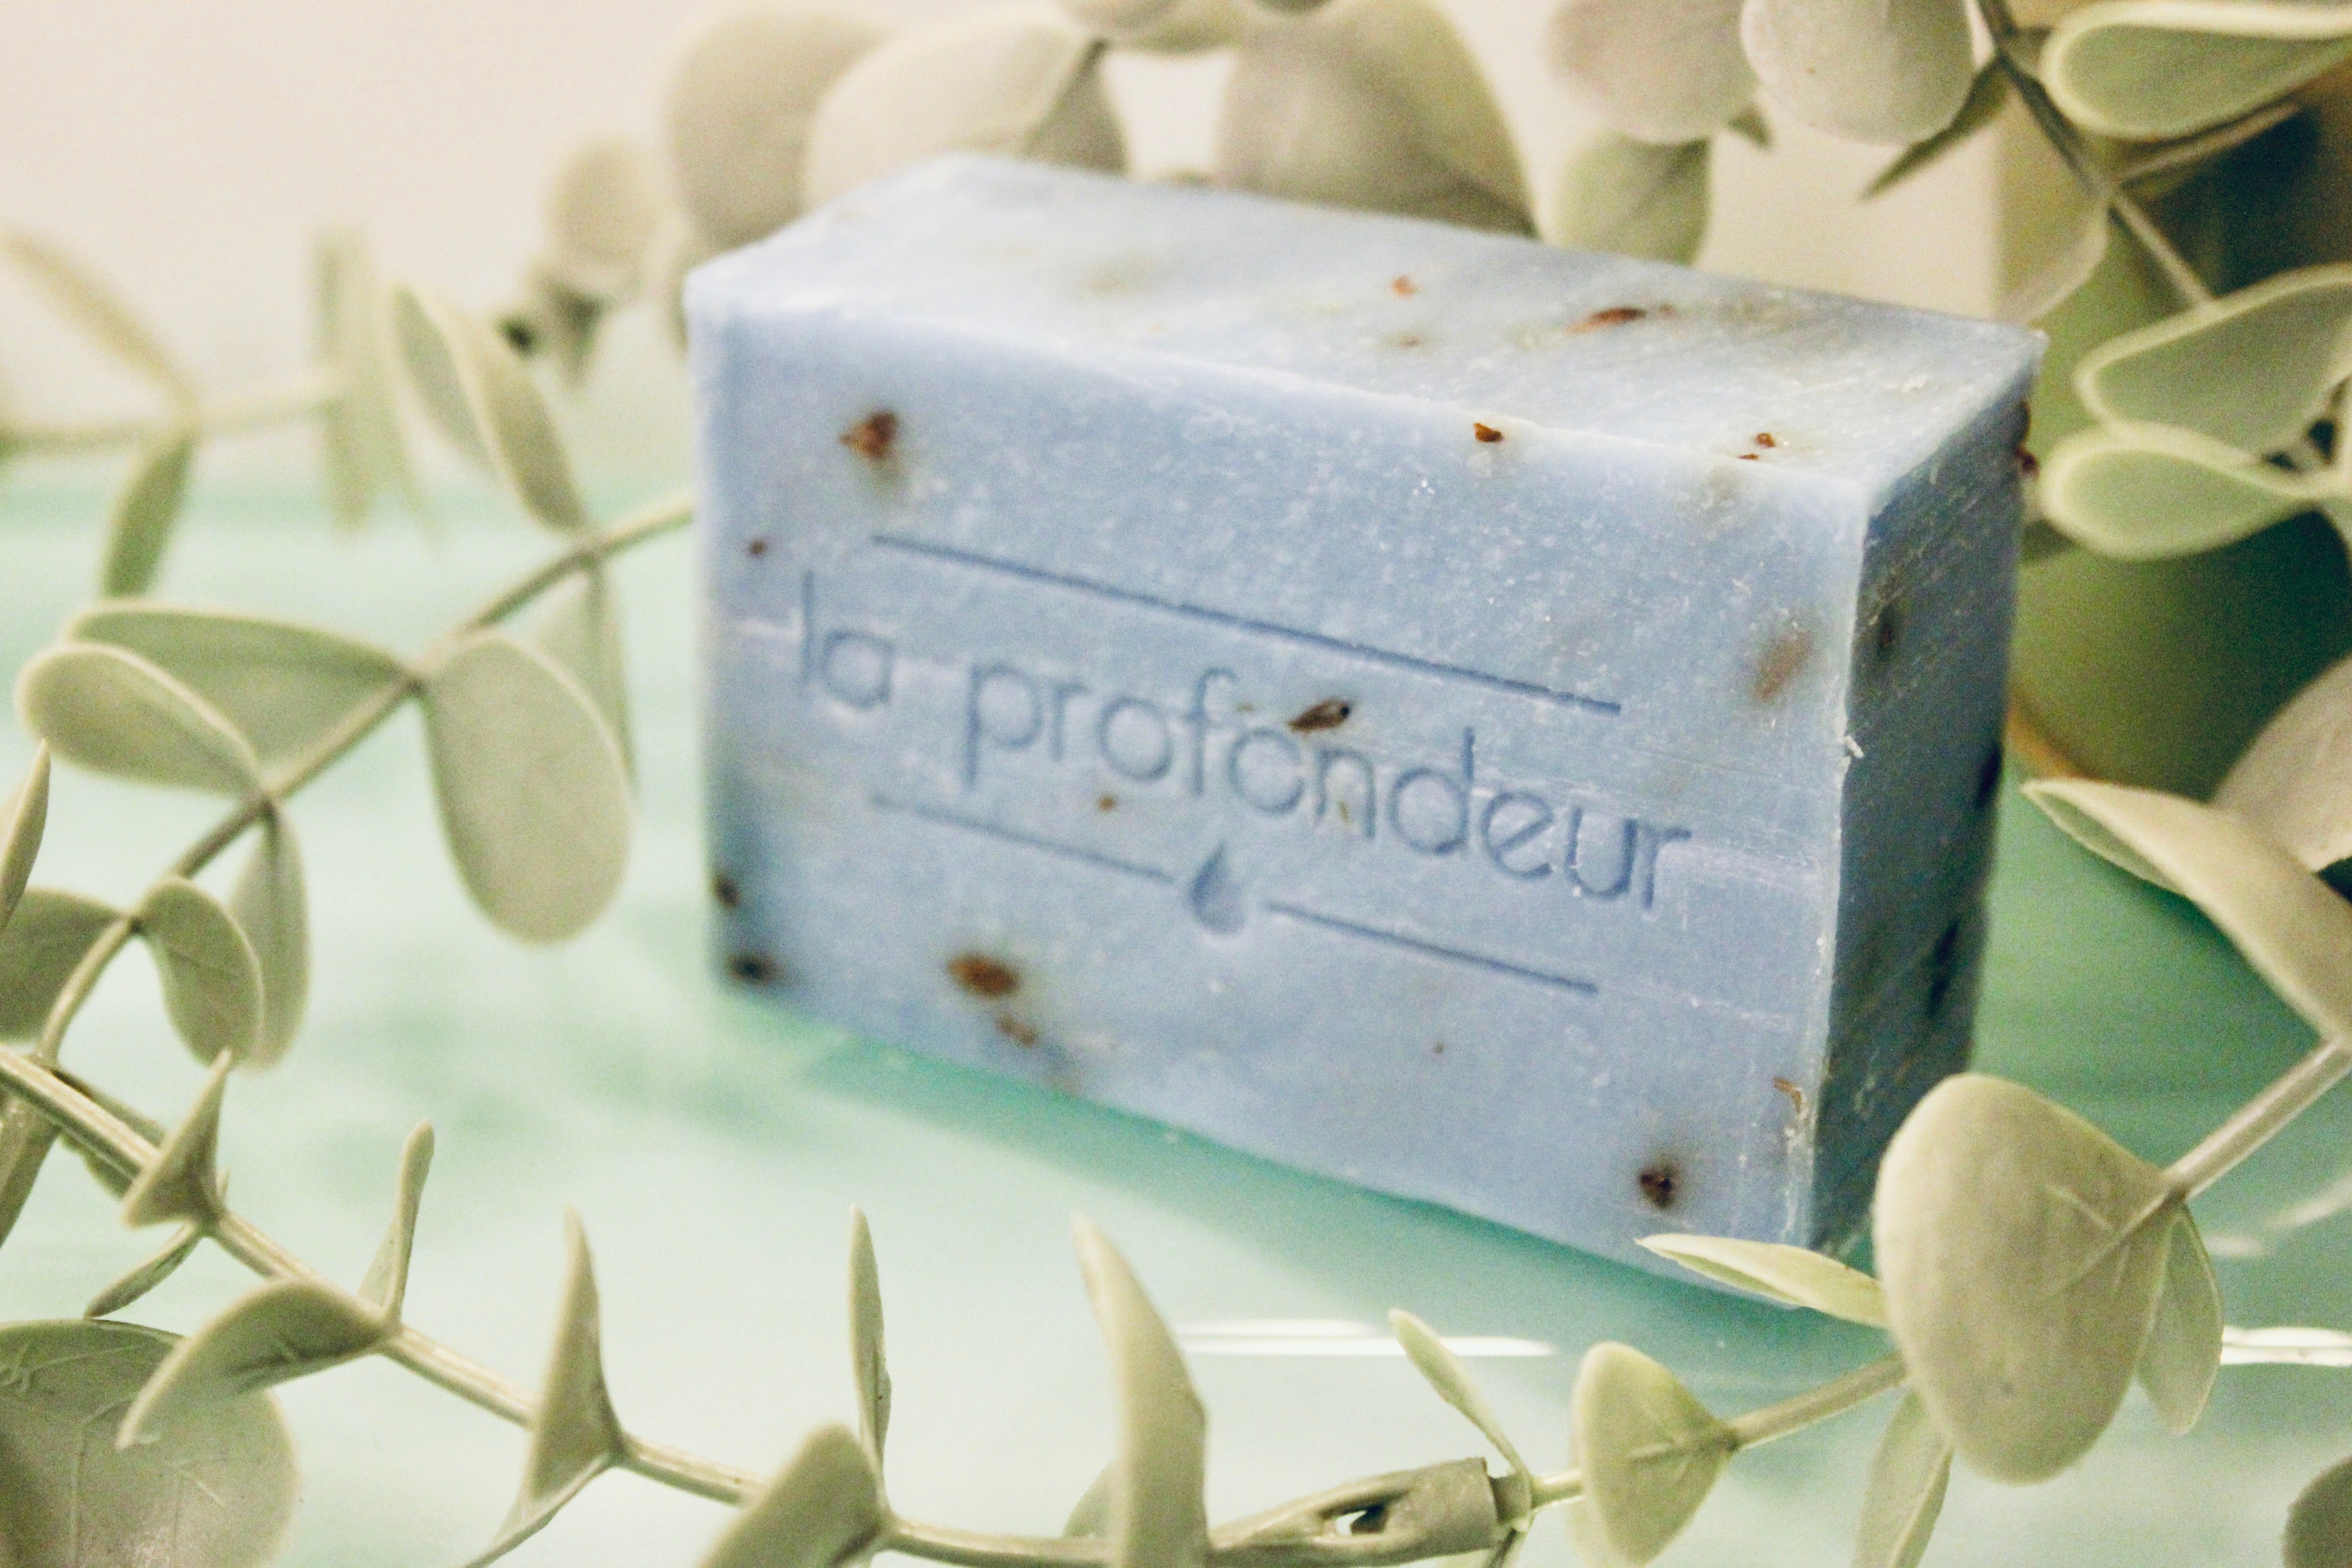 Lavender soap - more than "just soothing